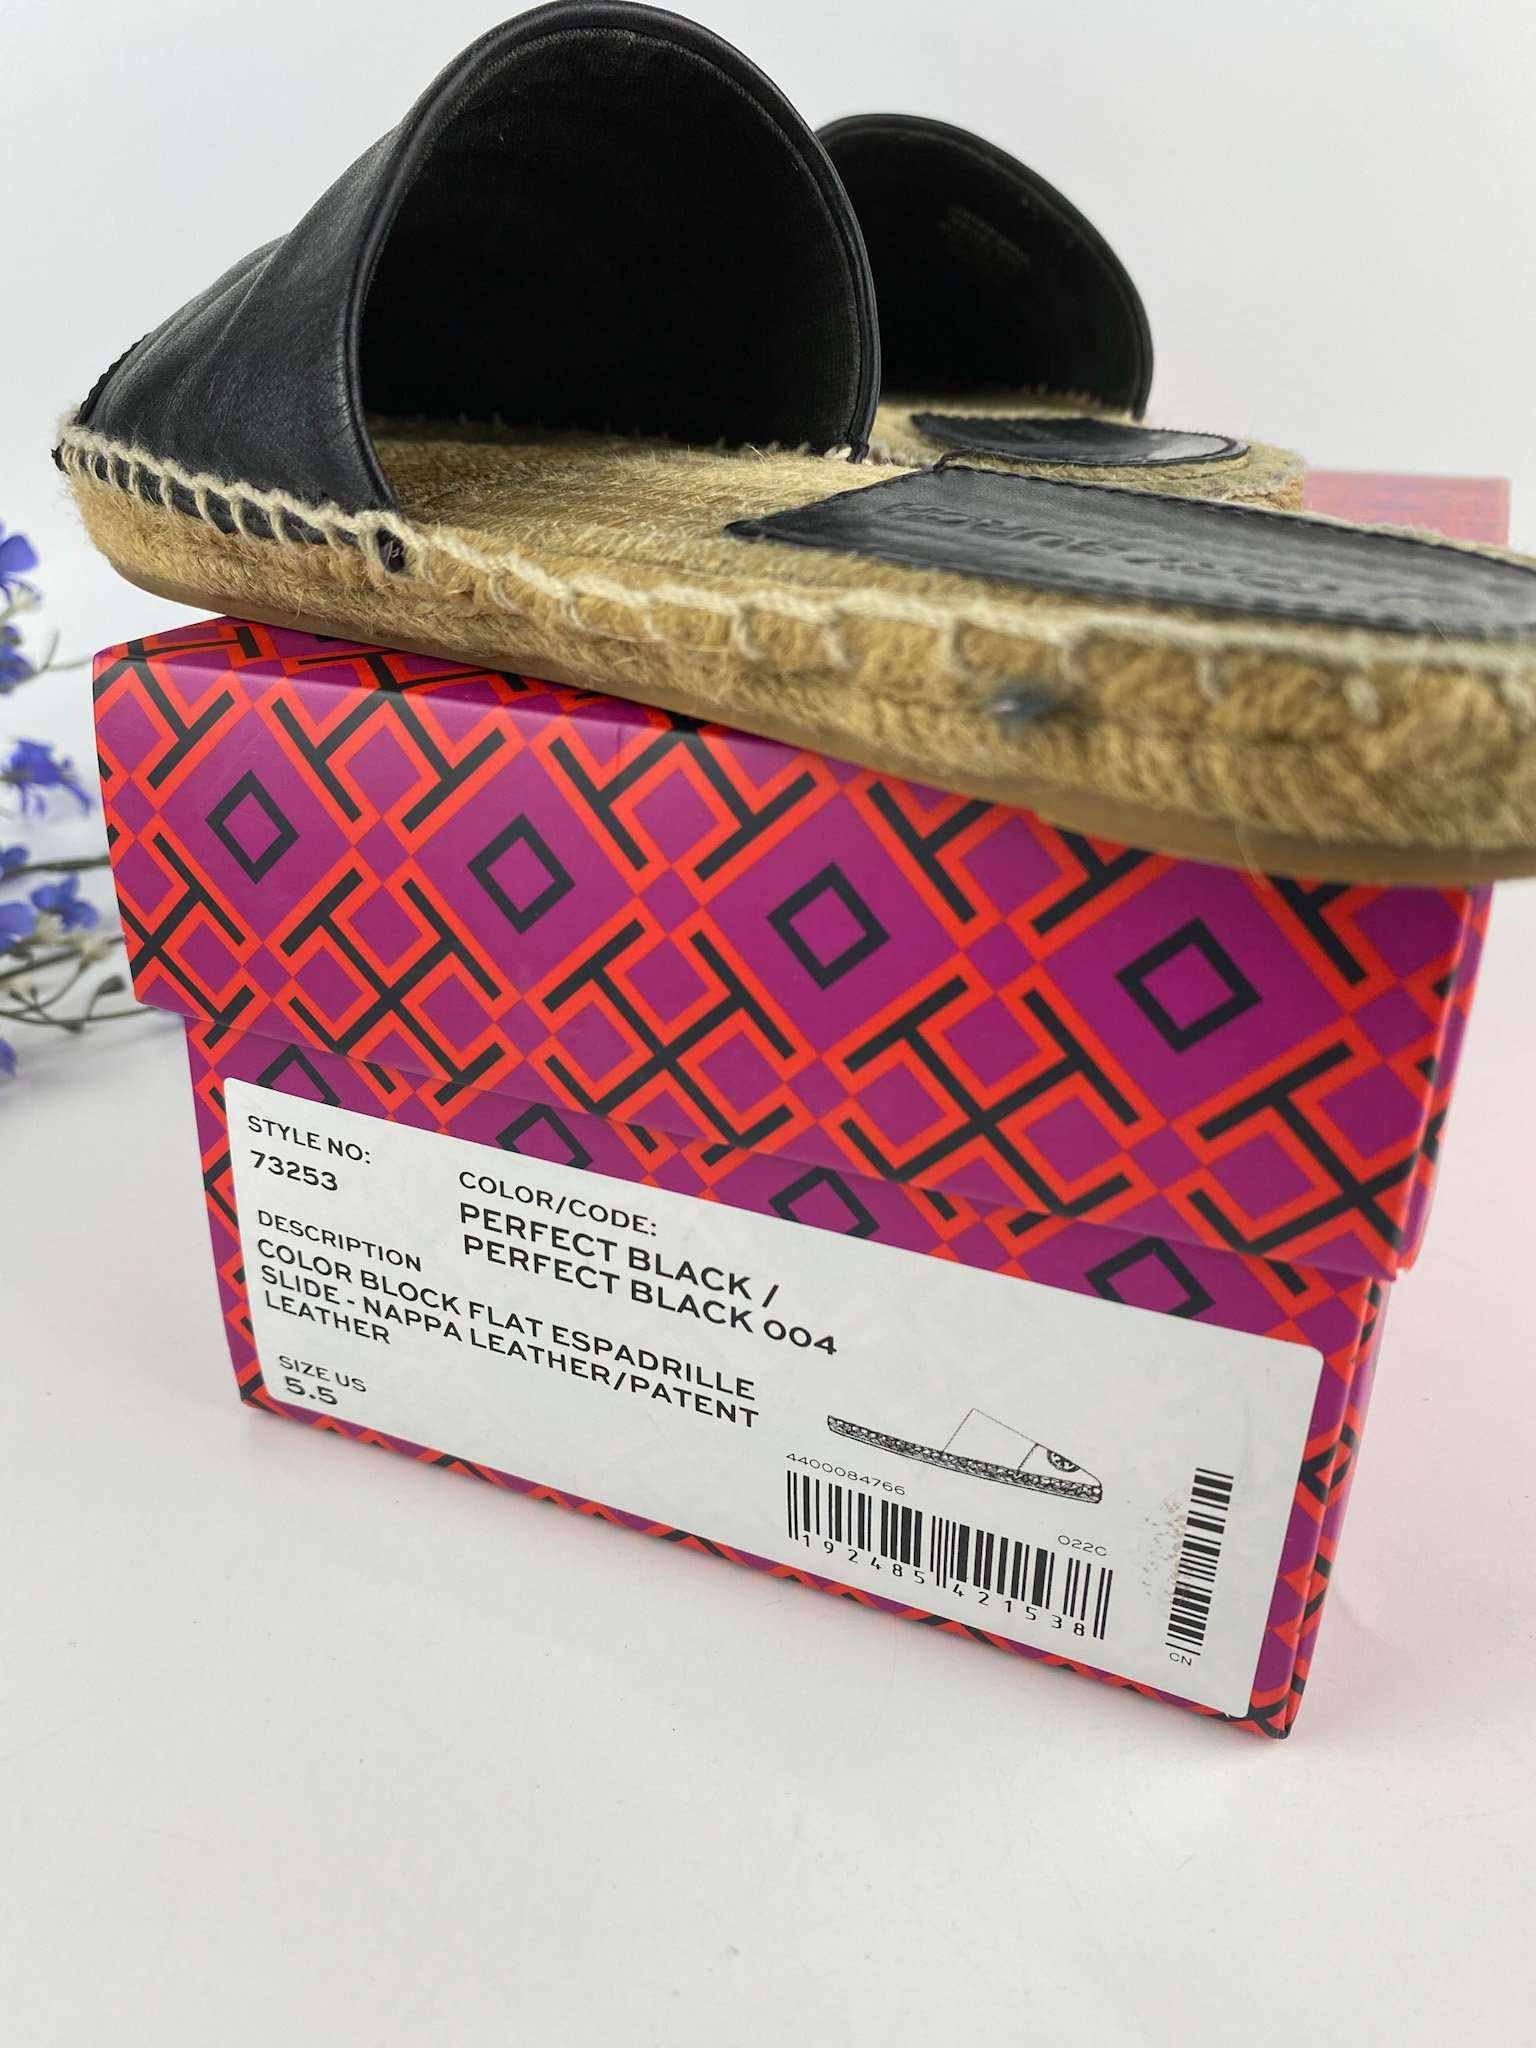 Tory Burch mules espadrille size 5.5 US